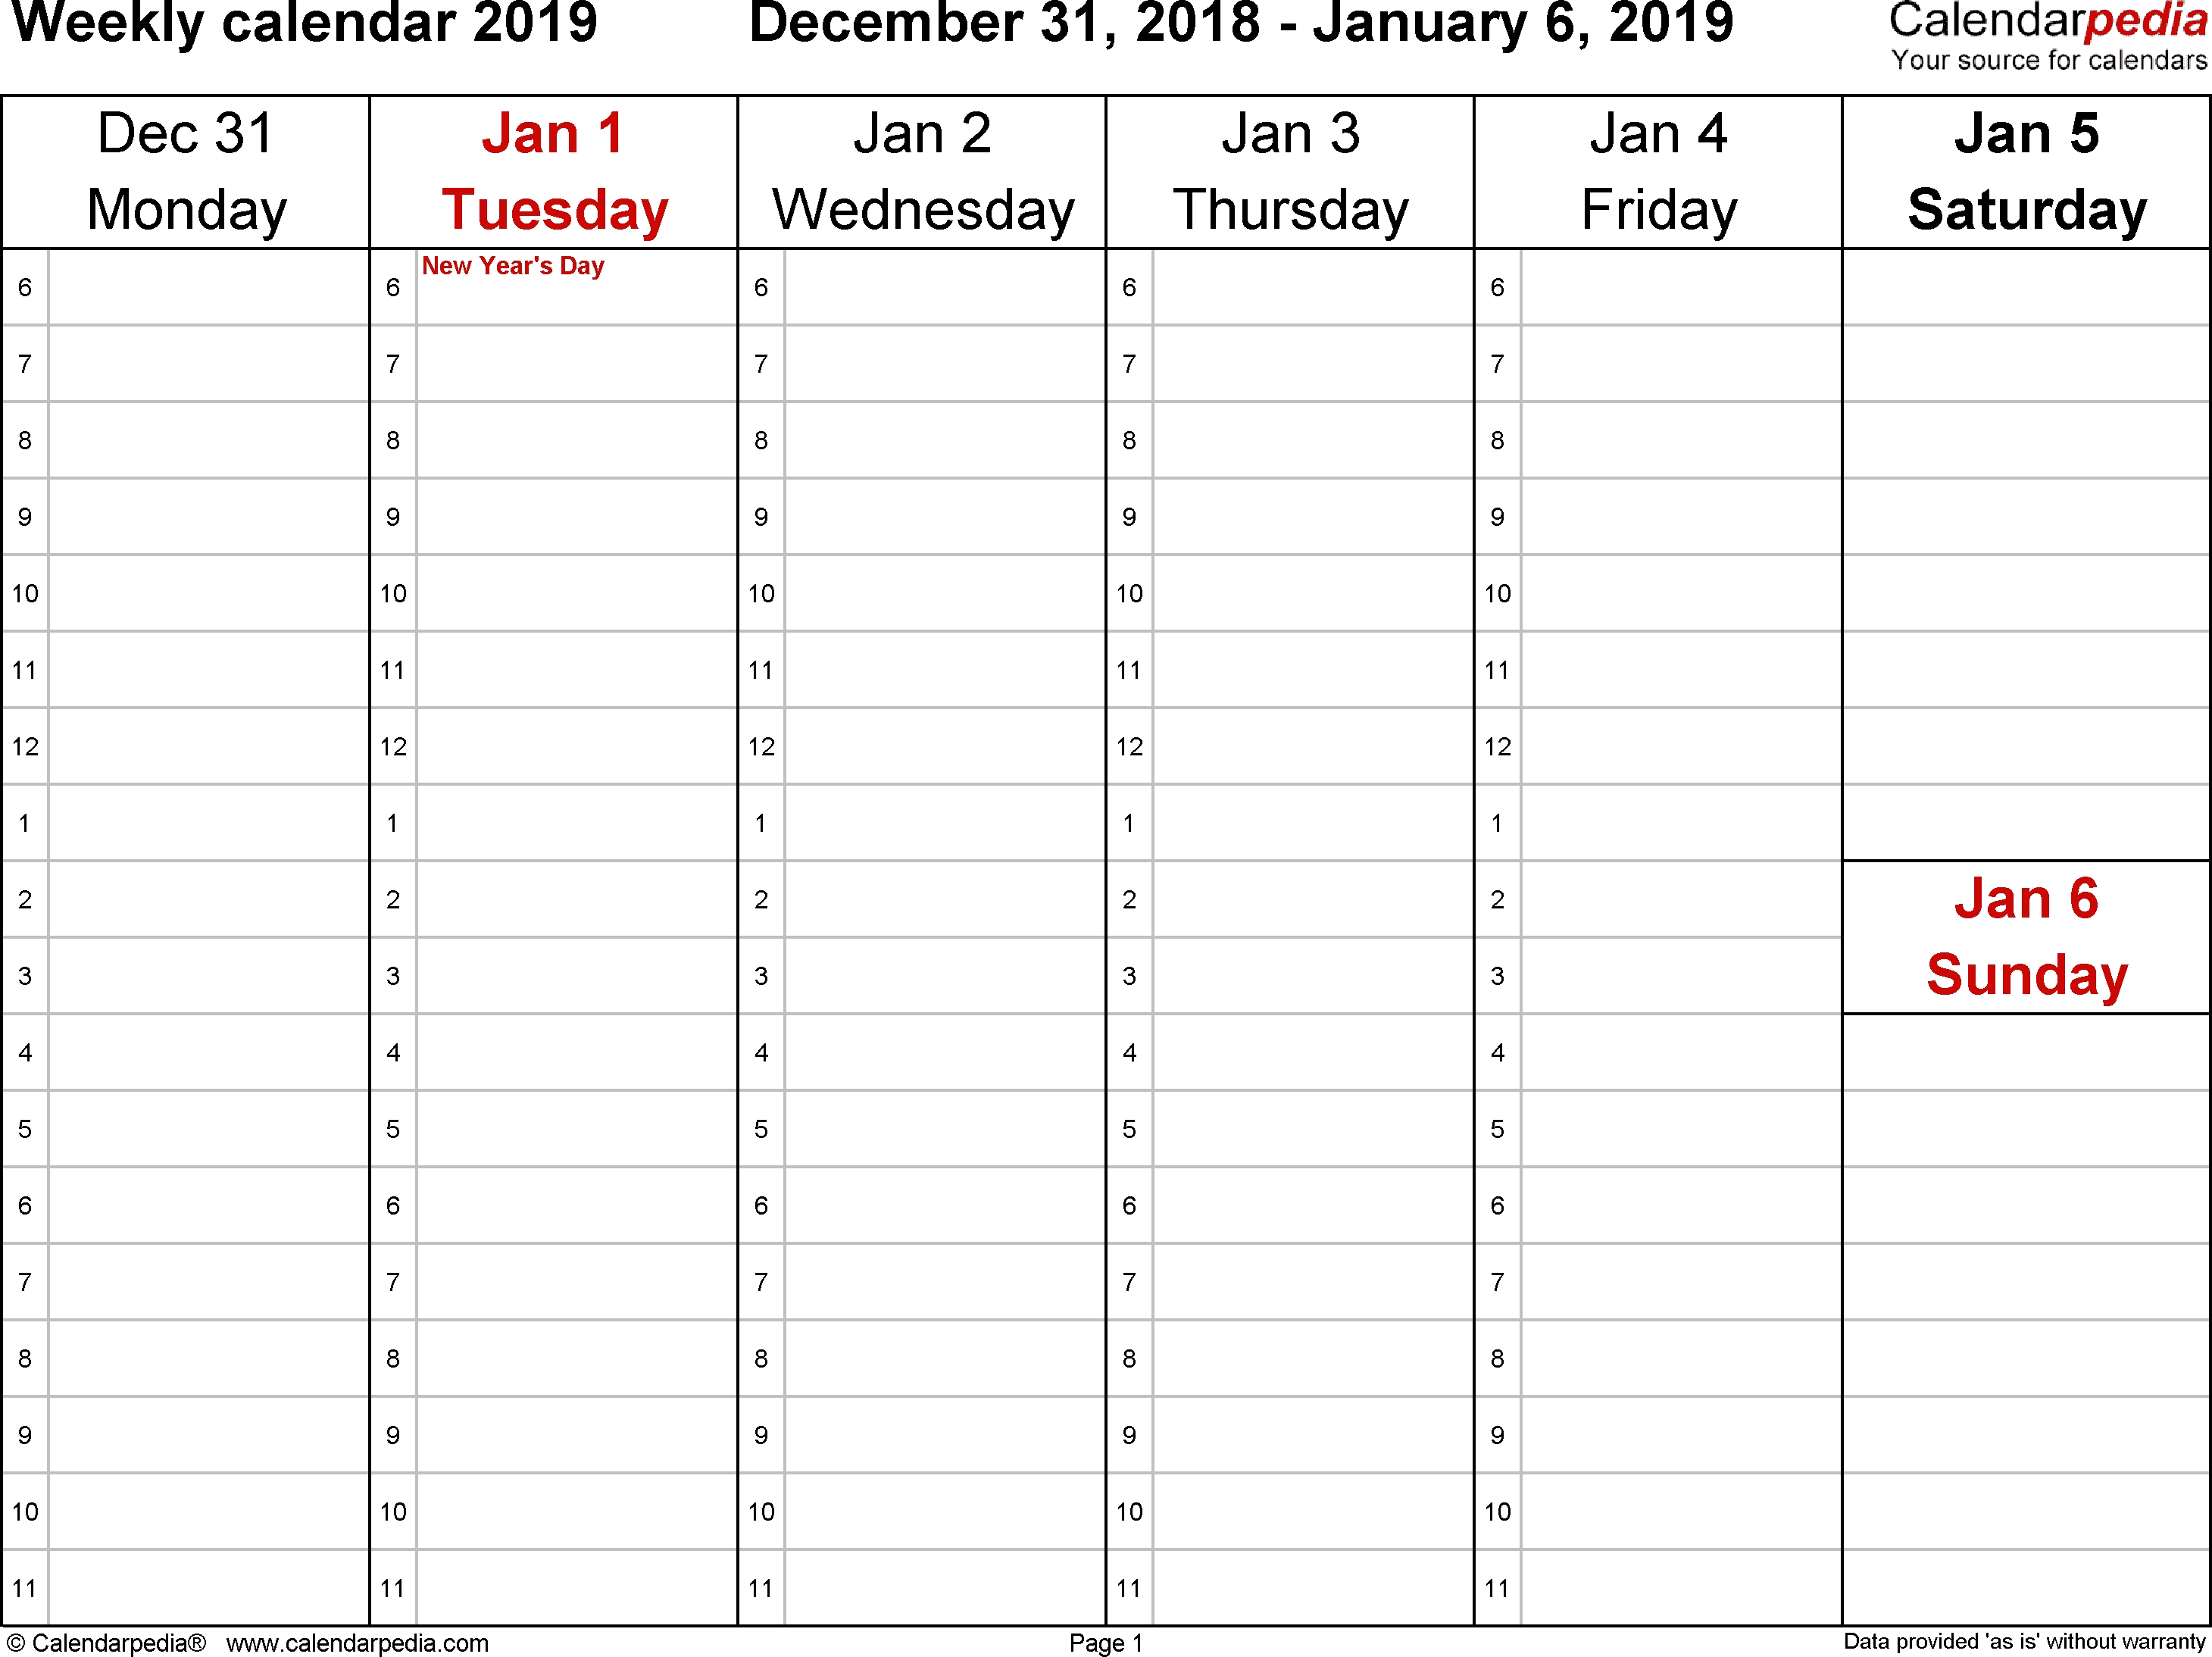 Weekly Calendar 2019 For Word - 12 Free Printable Templates-Free Blank Calender Montly Starting On Monday